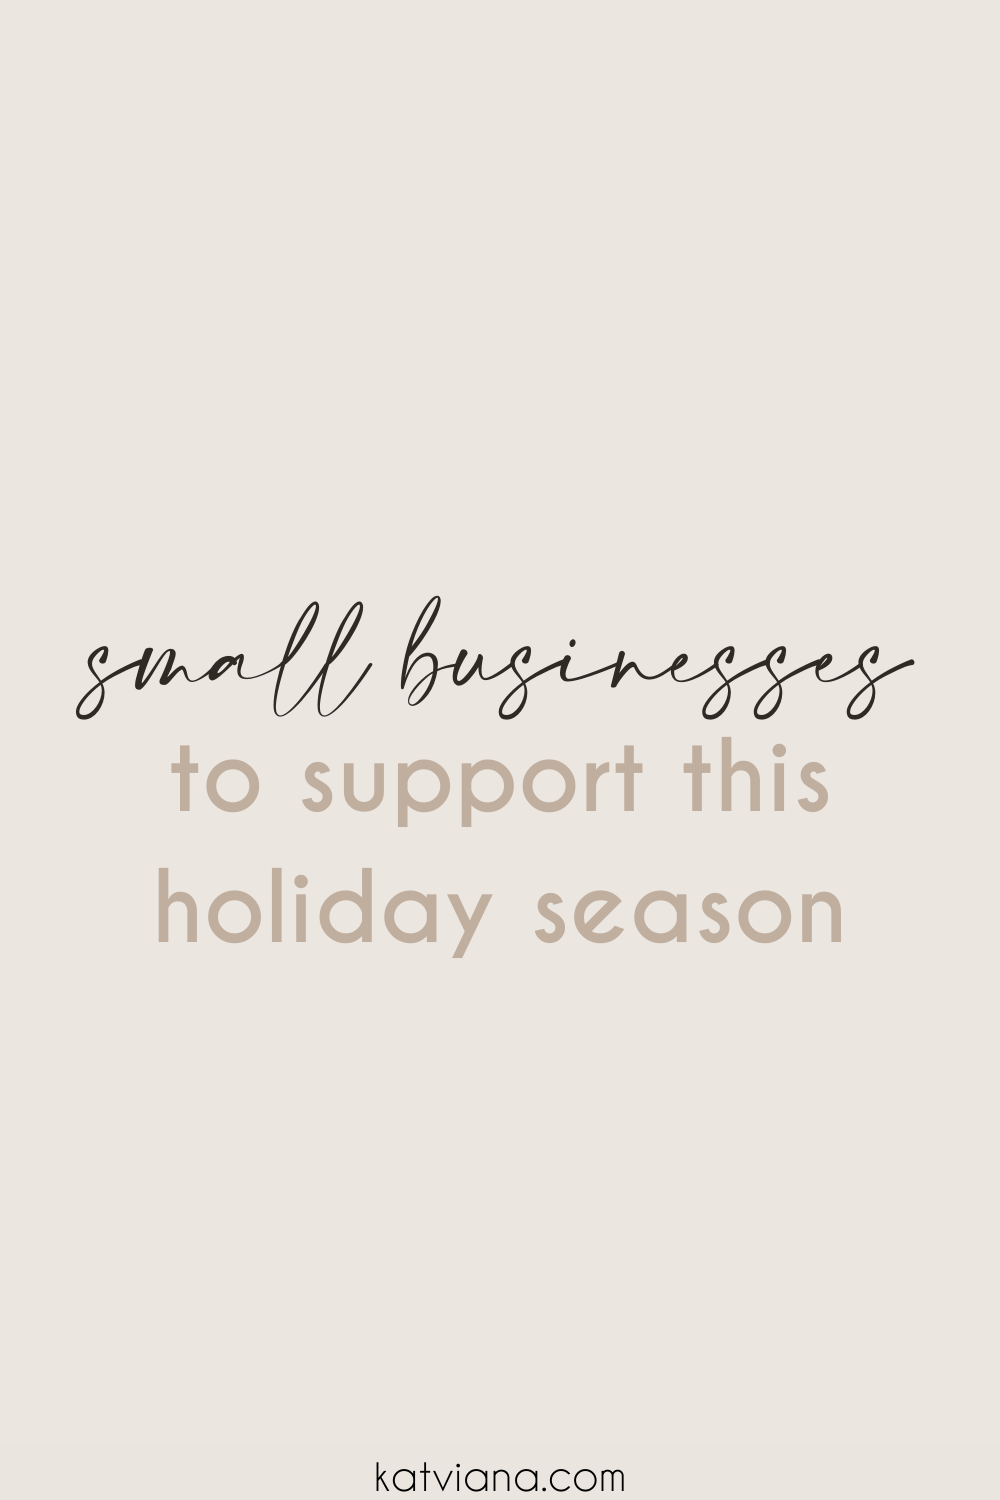 Some of the cutest gifts to gift this holiday season all from small businesses! | Kat Viana